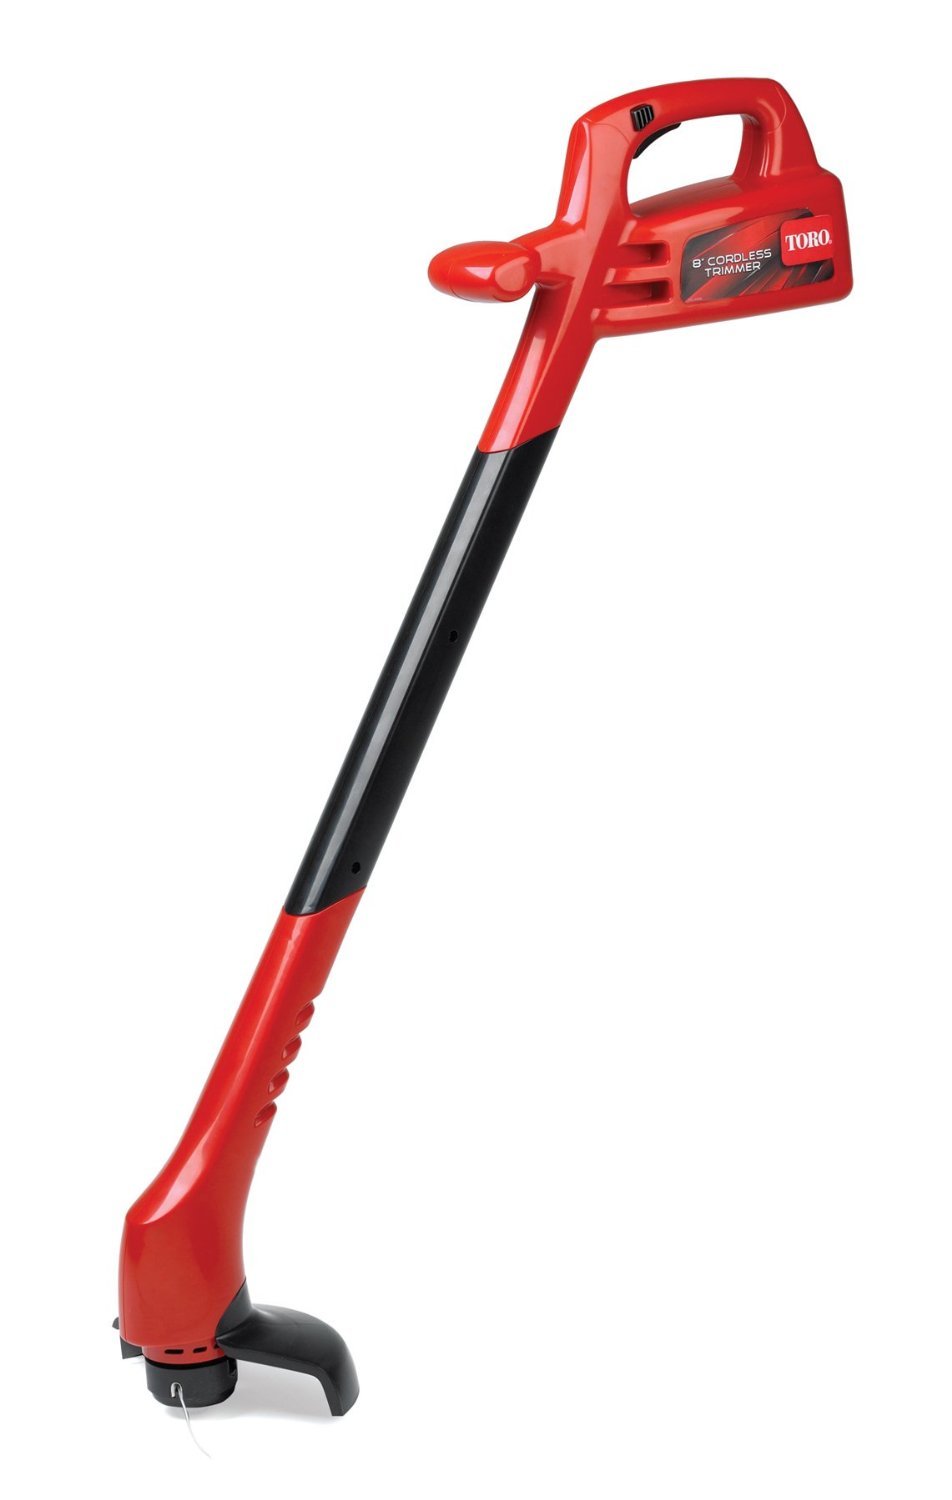 Toro 51467 Cordless 8-Inch 12-Volt Electric Trimmer